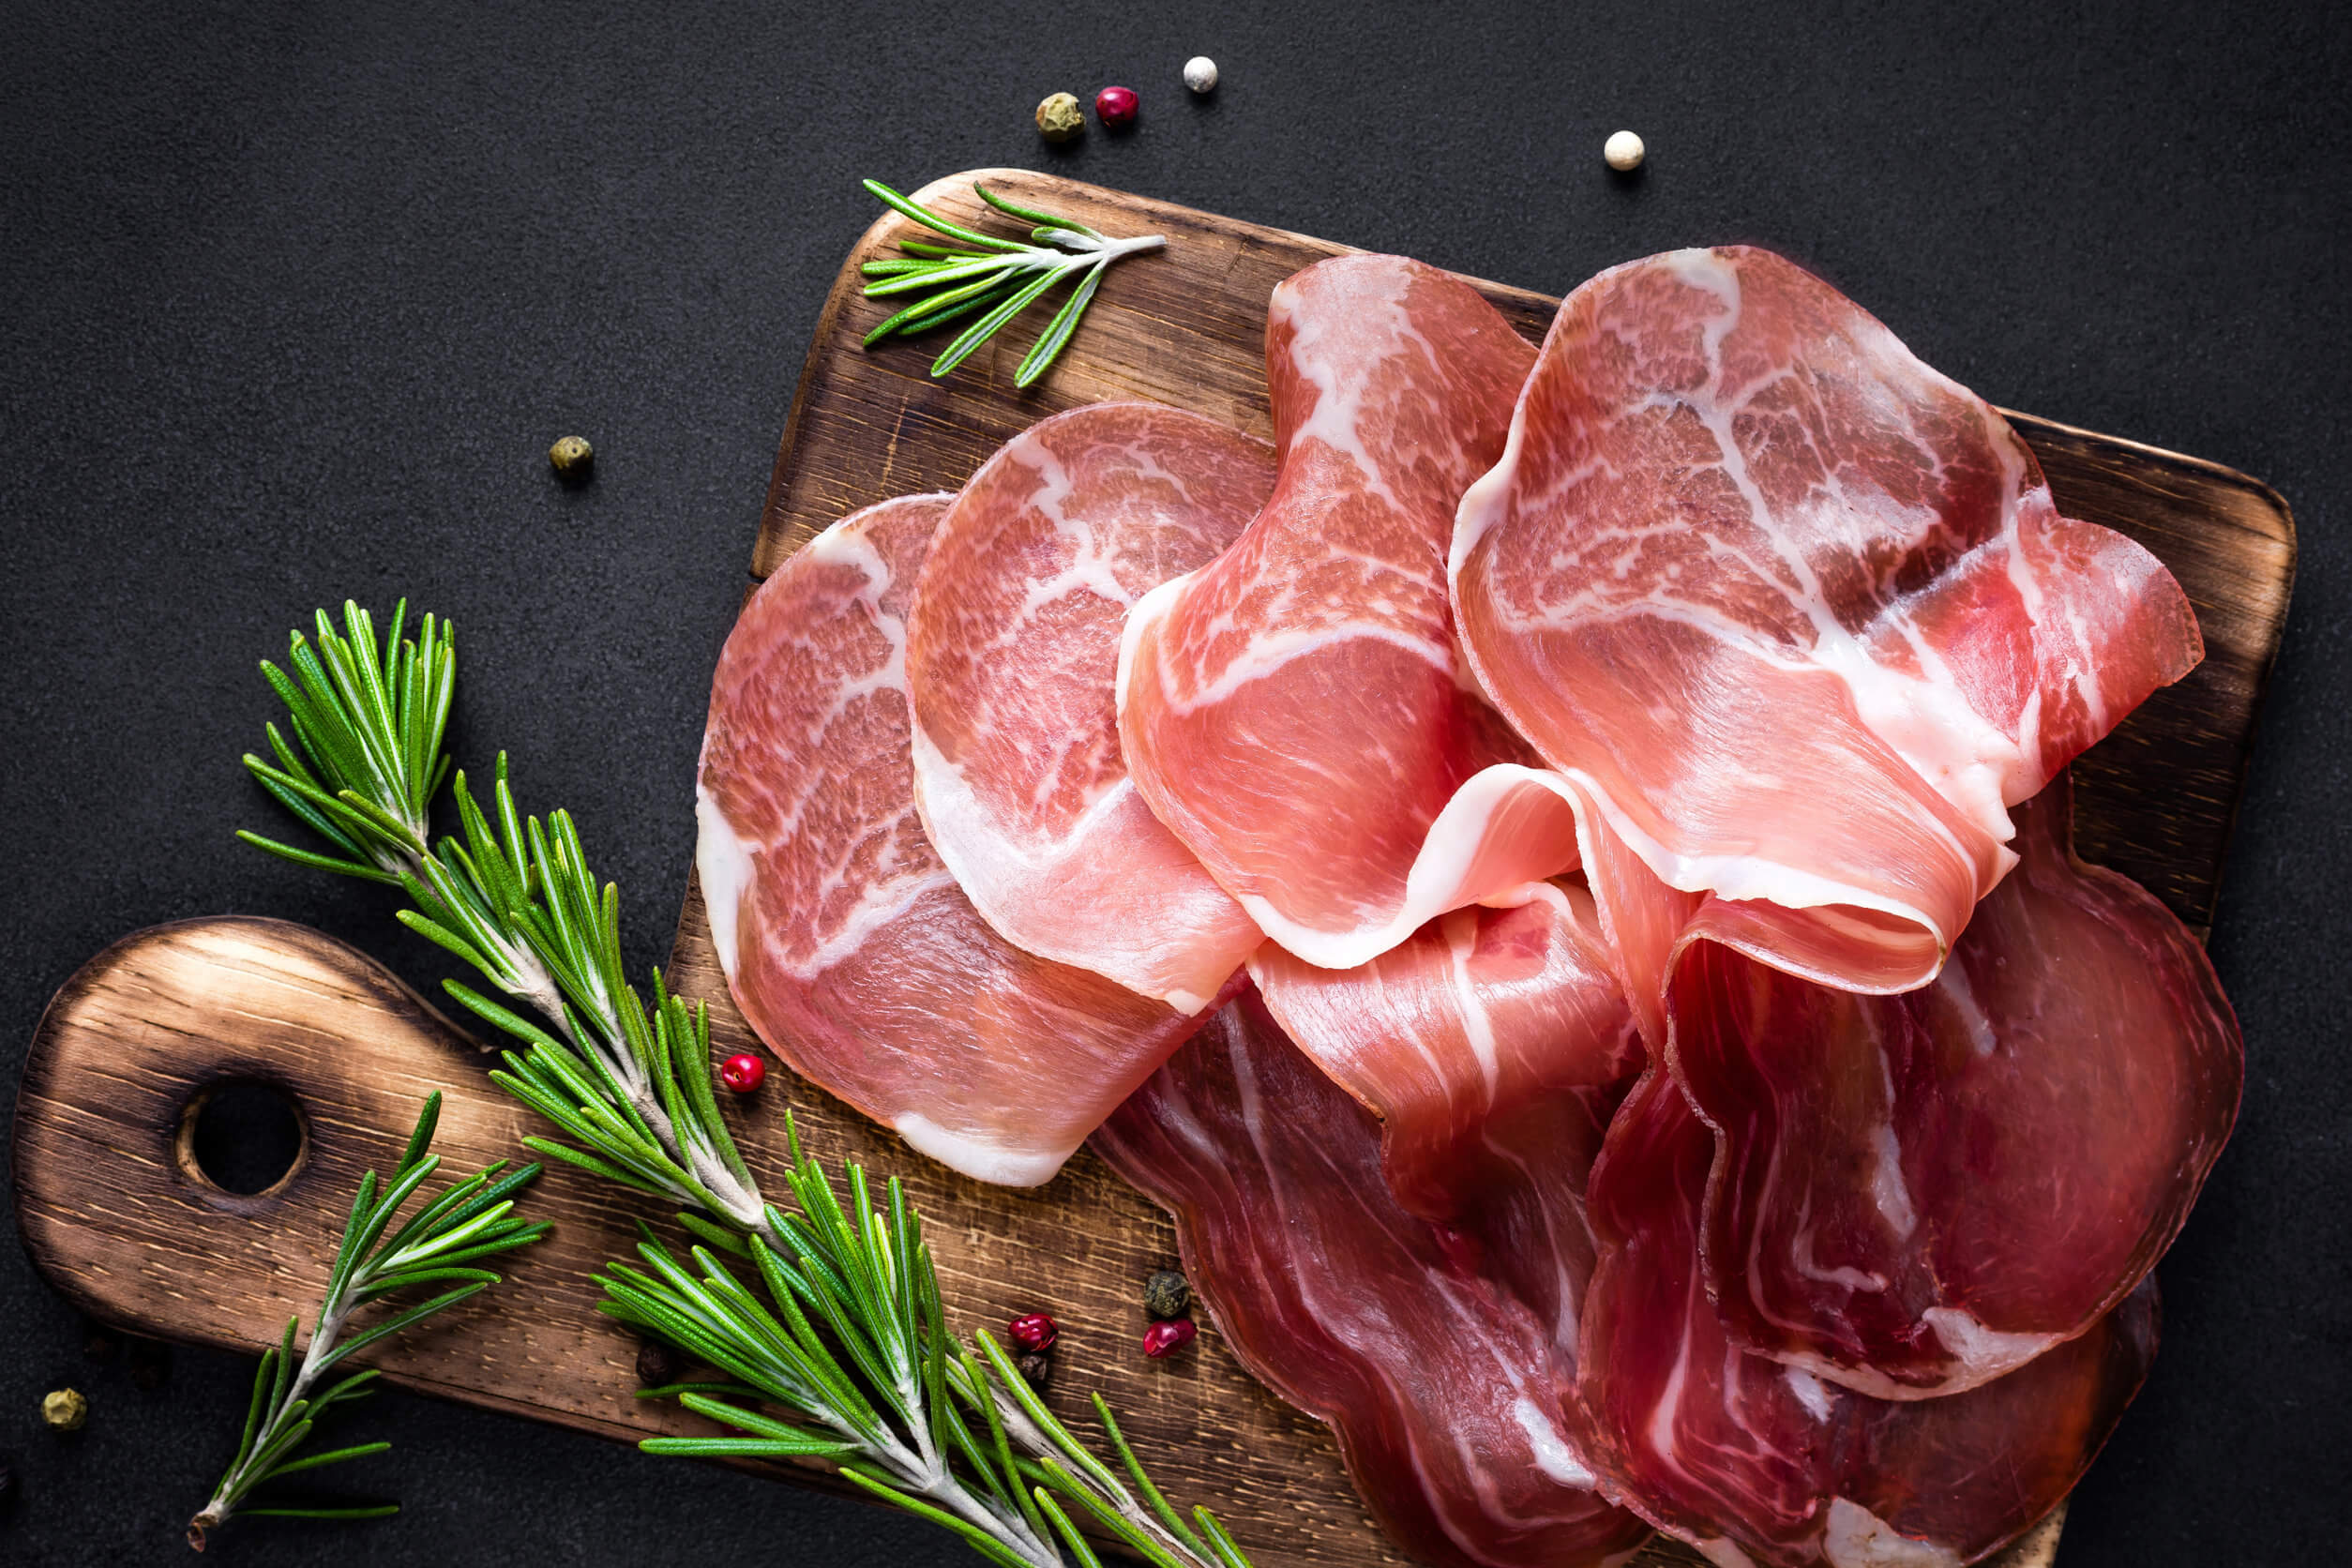 Among the healthy dinners to lose weight is the Serrano ham